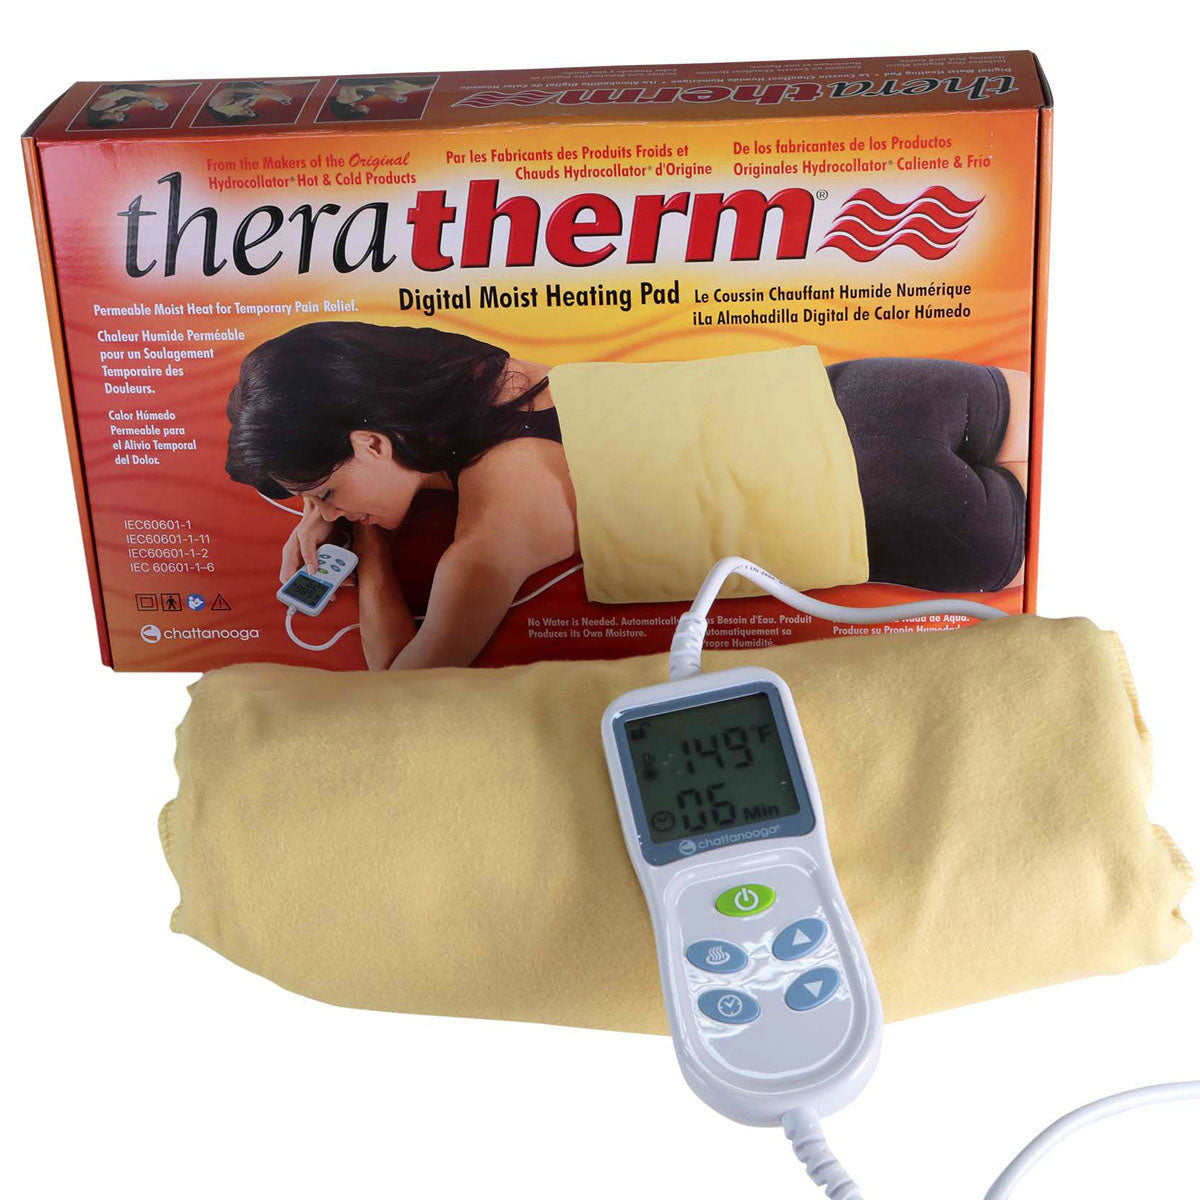 Theratherm Digital Moist Heating Pad Healthcare Solutions